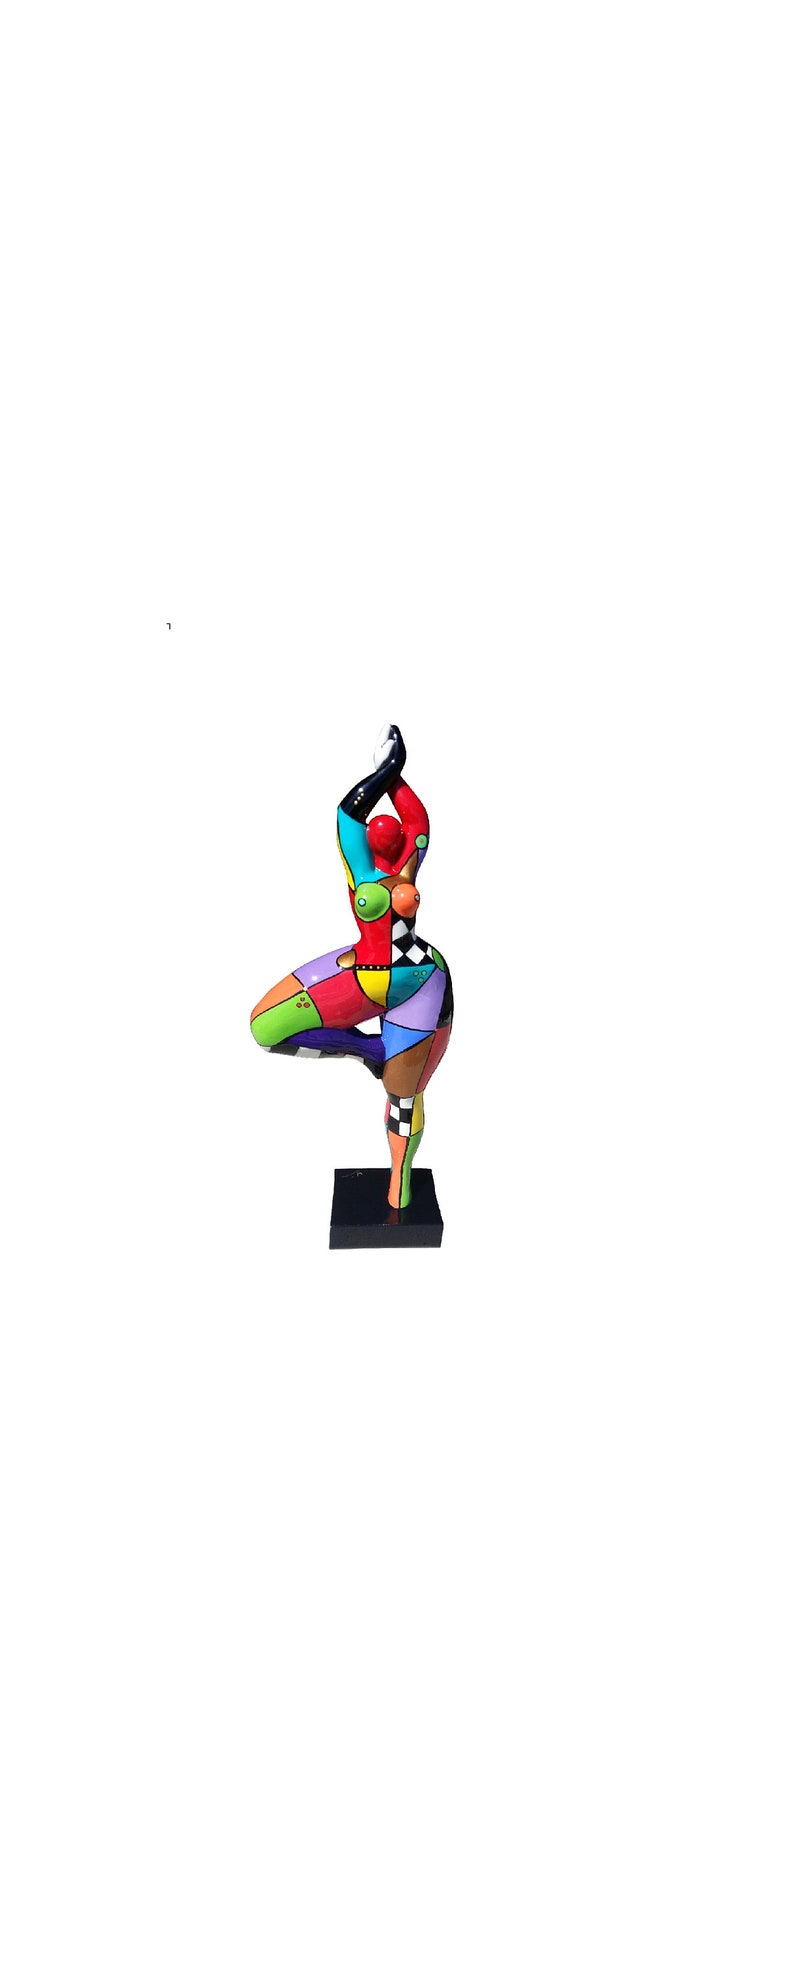 Statue of round woman Nana dancer, multicolored resin. Model Mina by Laure Terrier. Height 20.4 inches with the base image 1